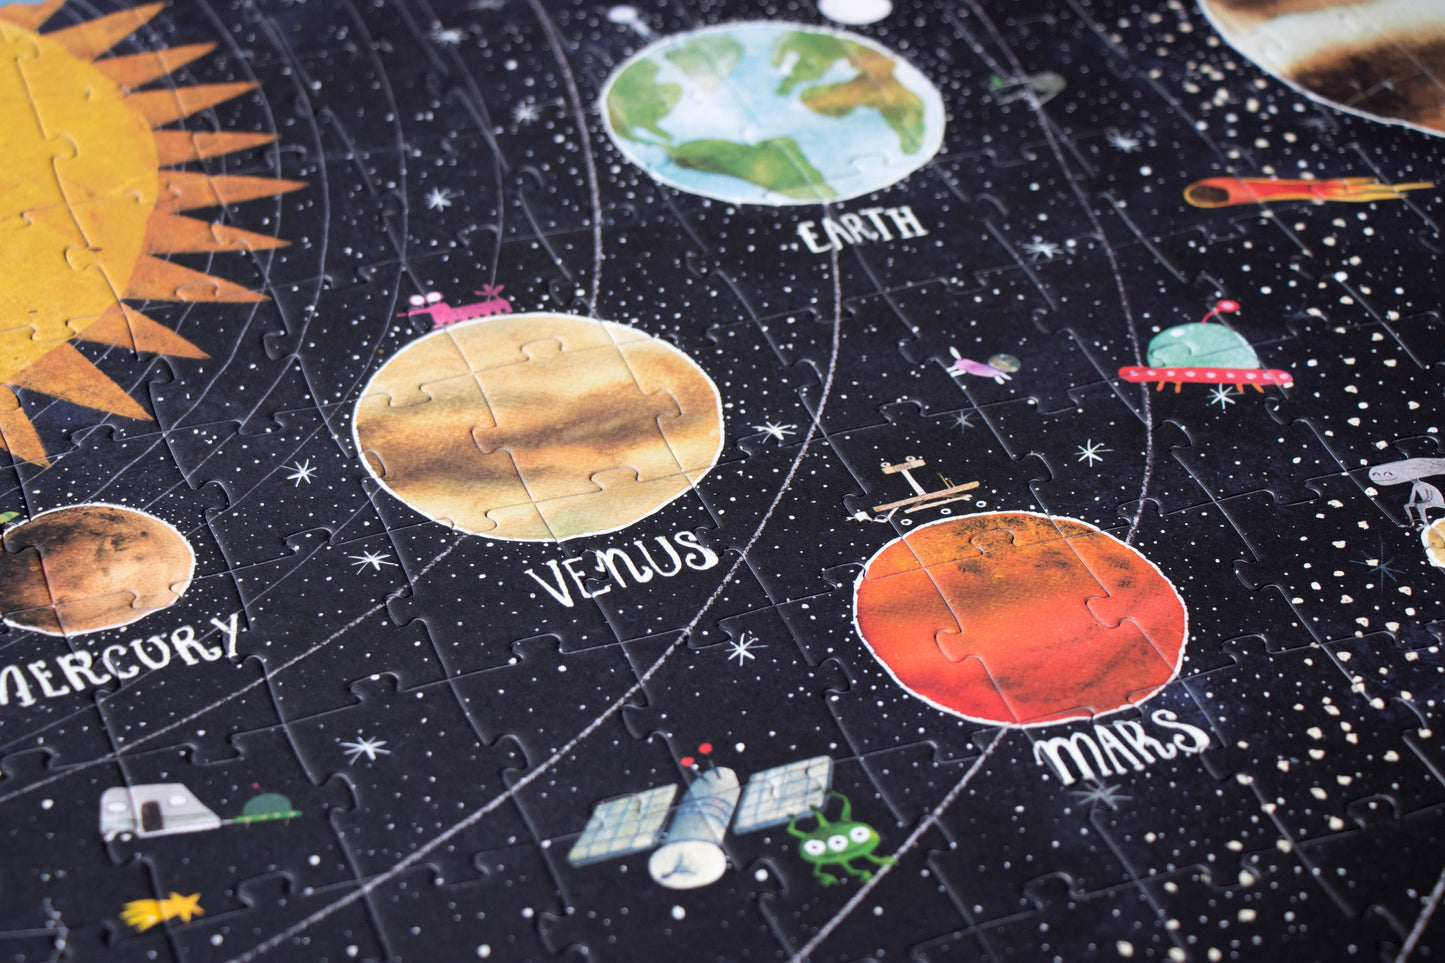 Londji - Discover the planets puzzle